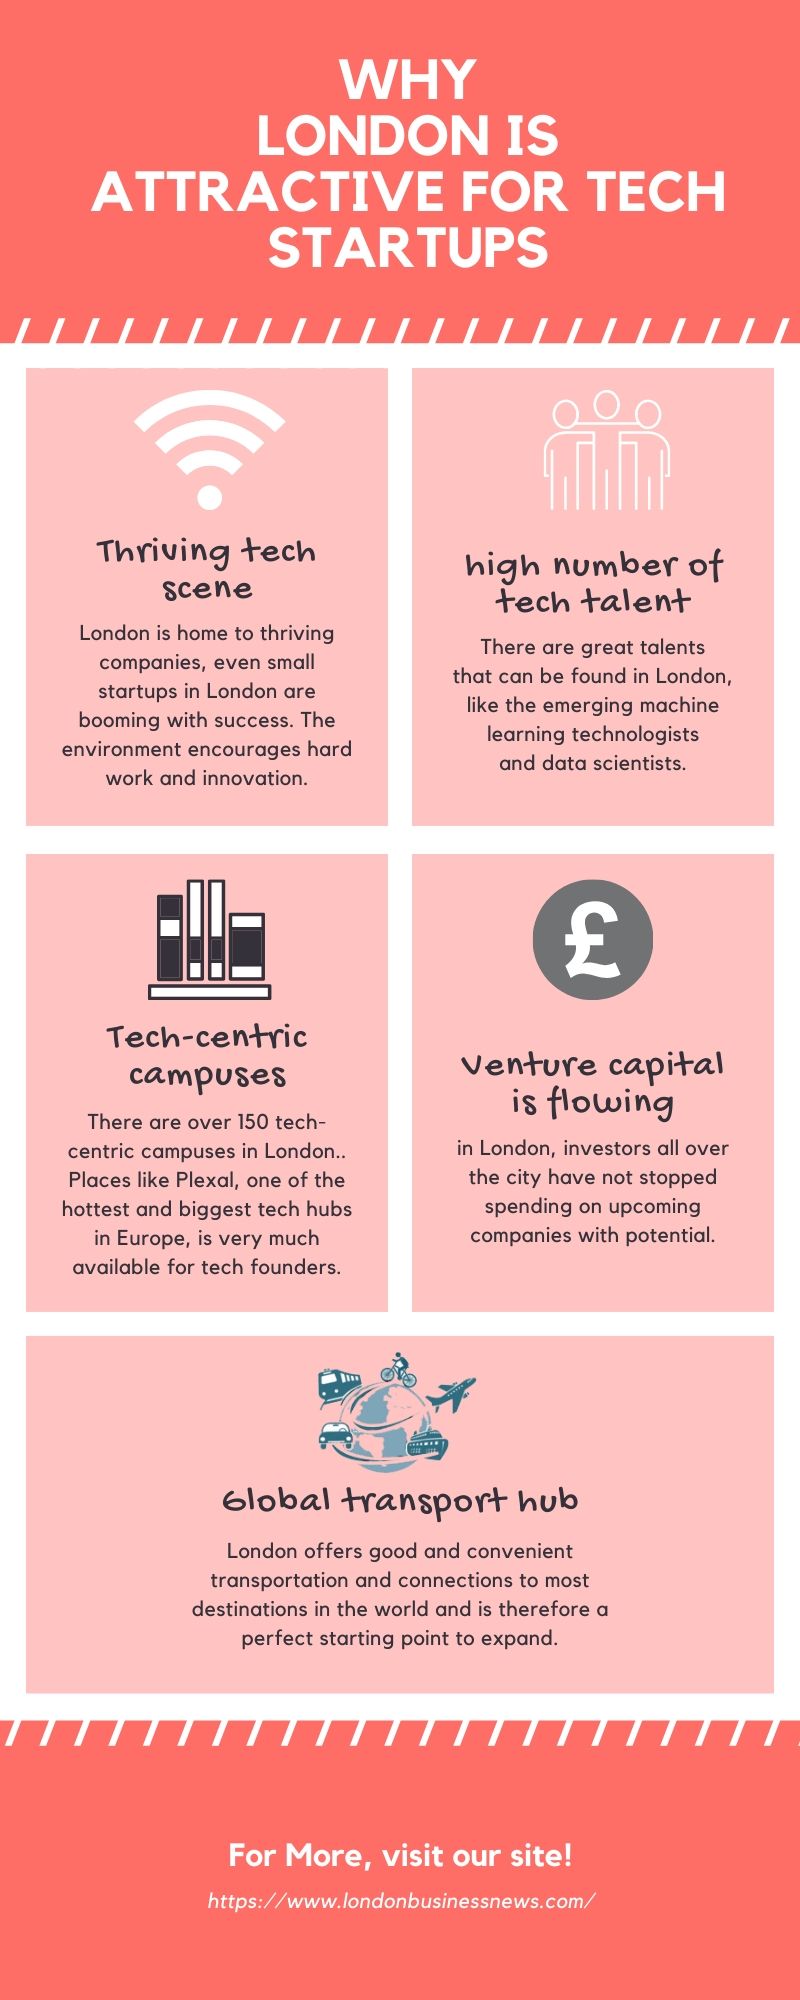 Top 5 reasons why London is attractive for tech startups Info